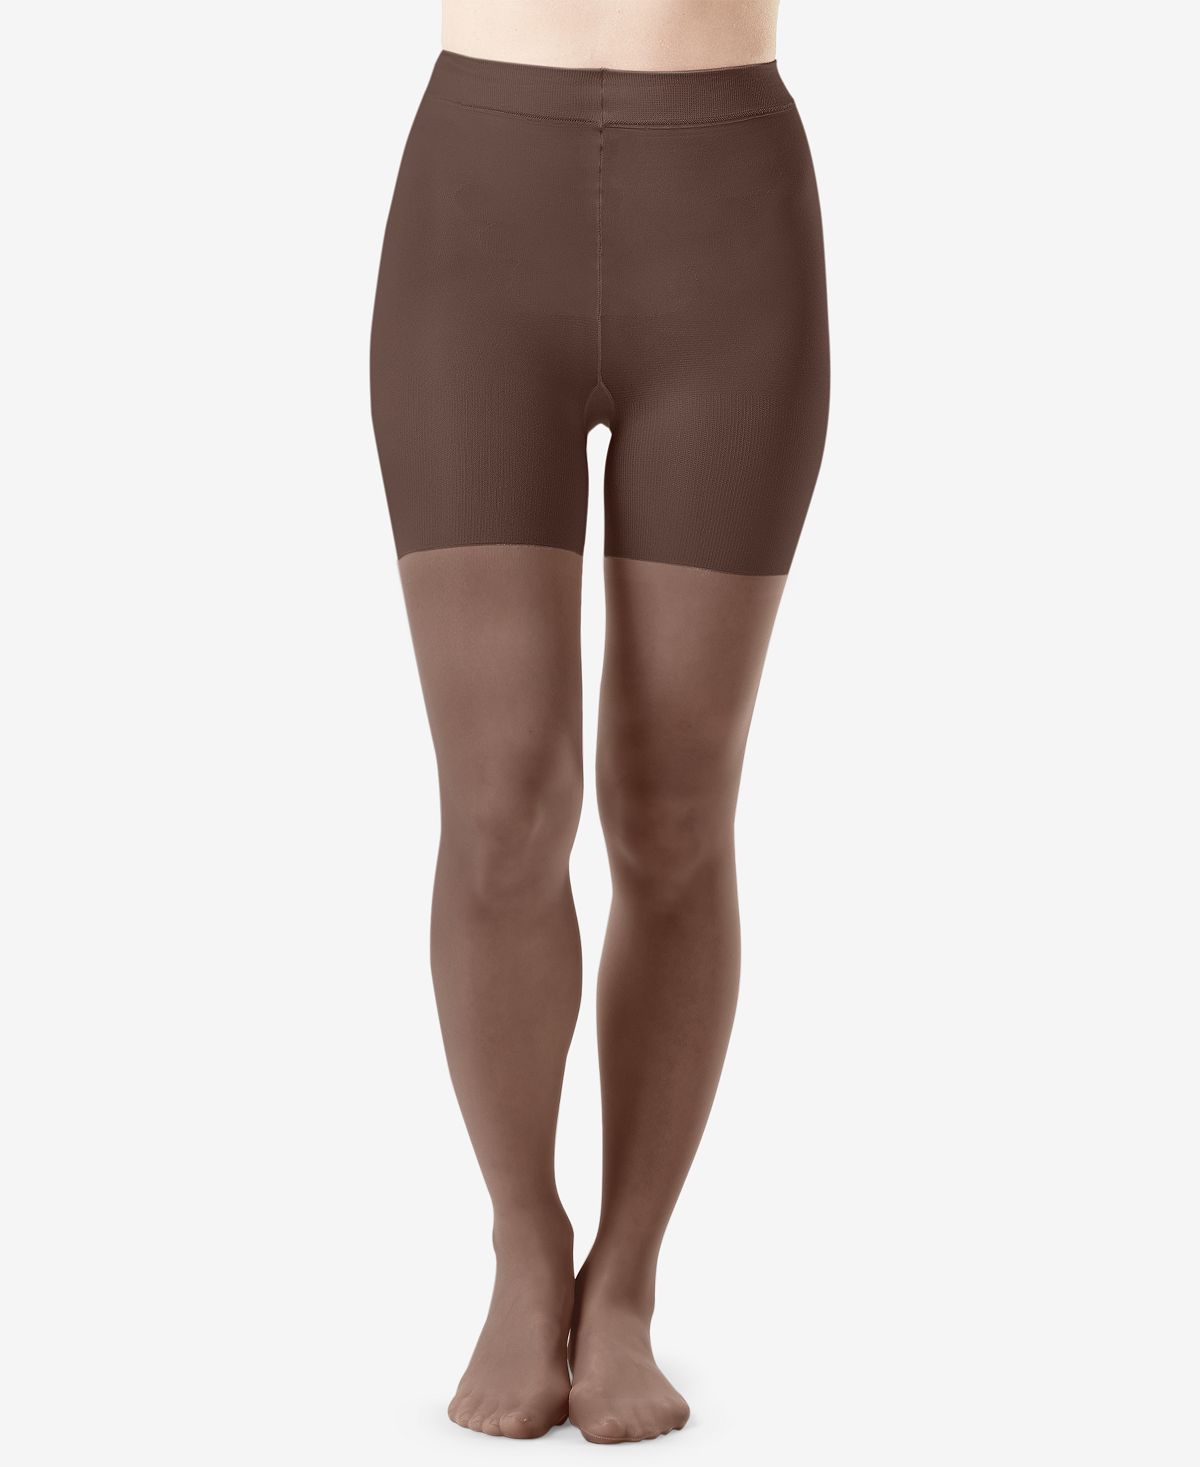 Spanx remarkable Relief Pantyhose Sheers S7